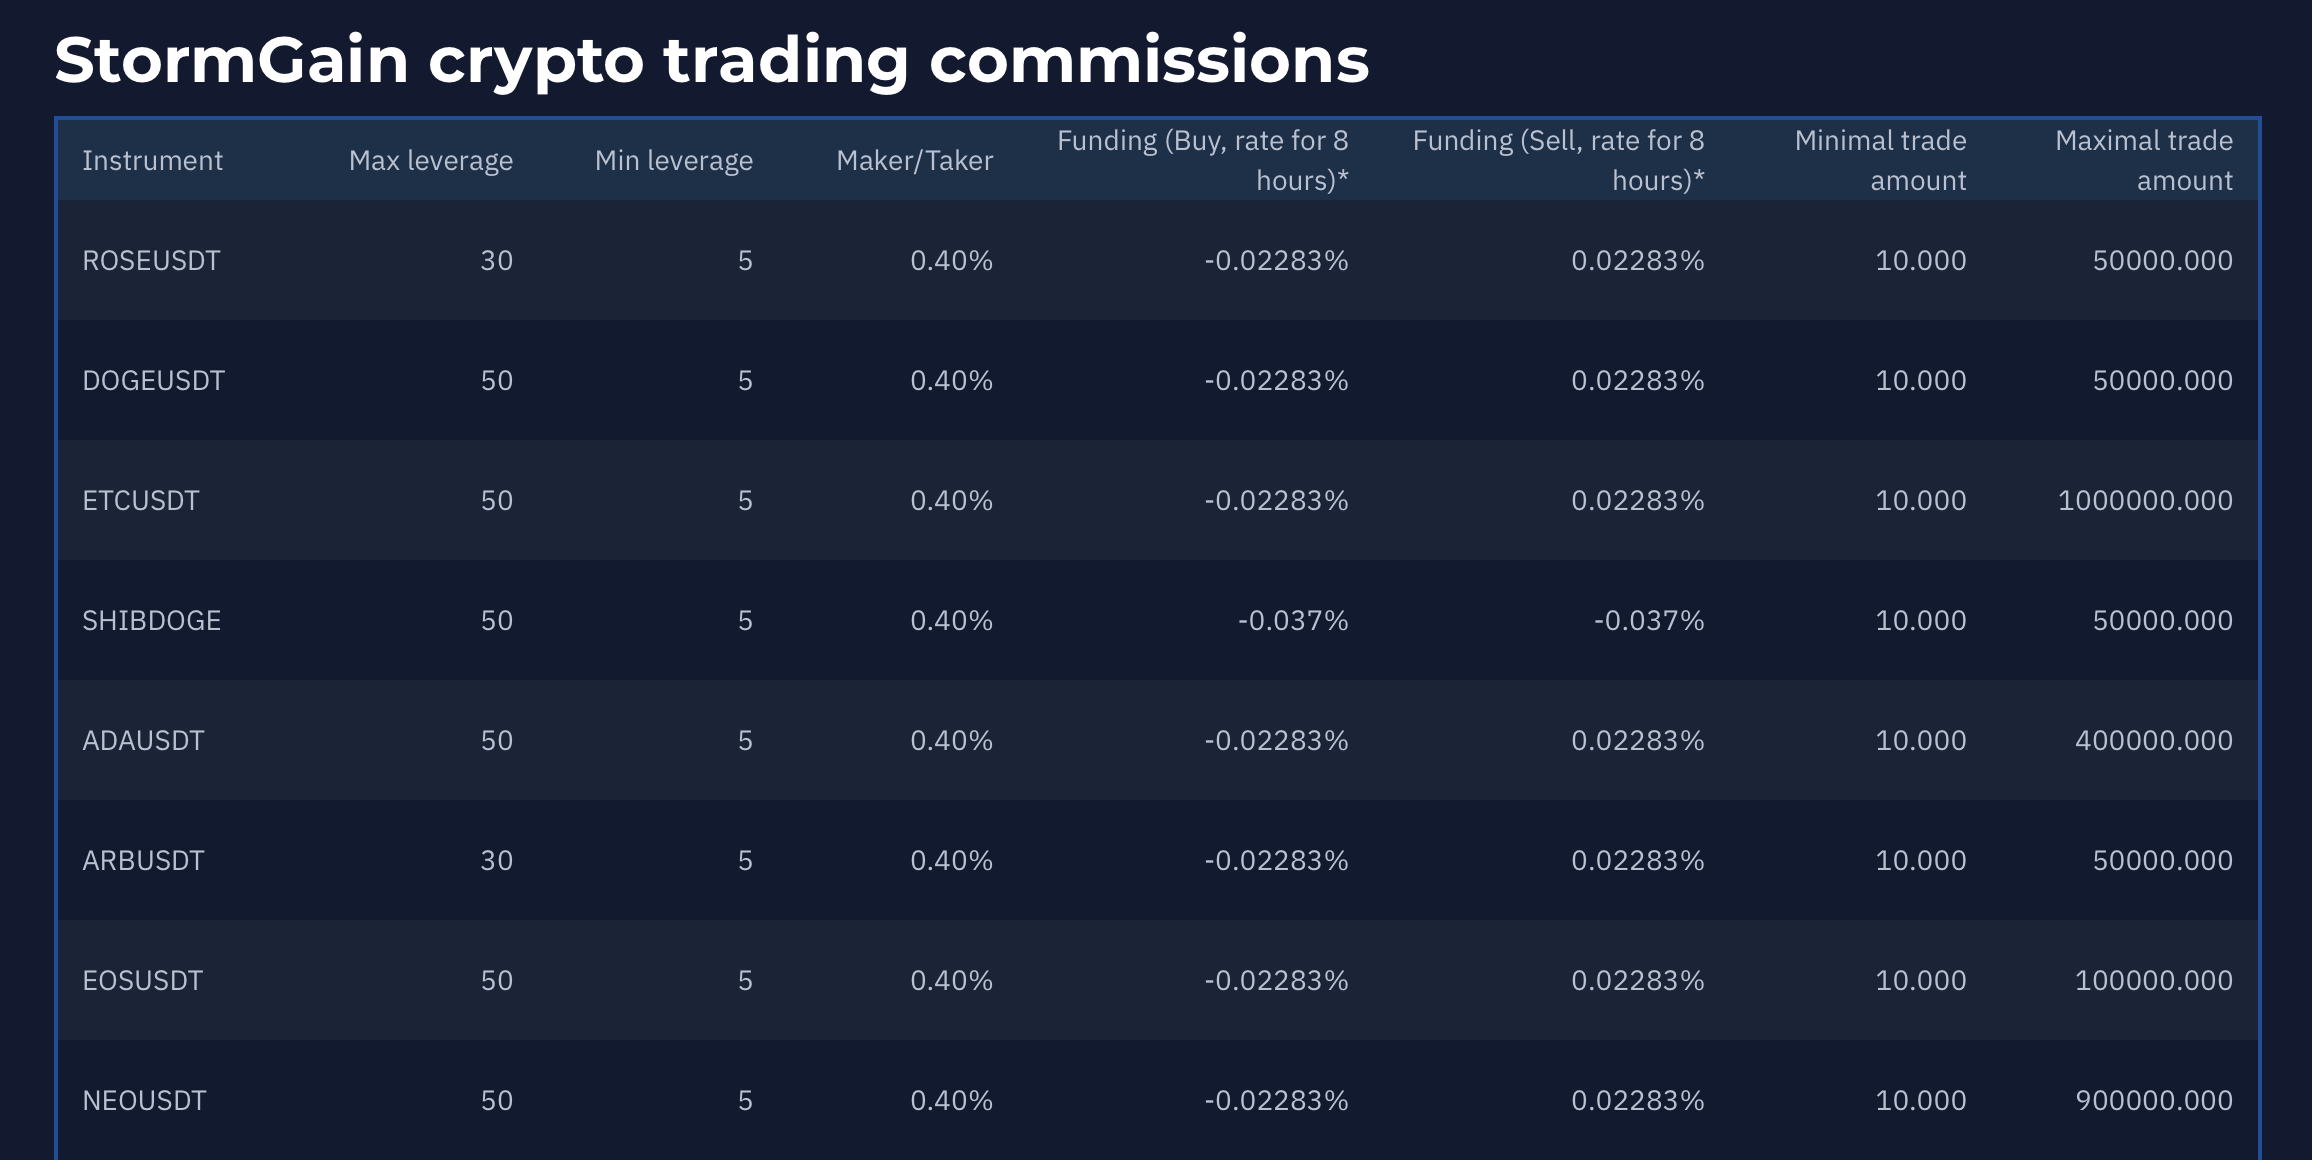 Table showing StormGain trading commissions